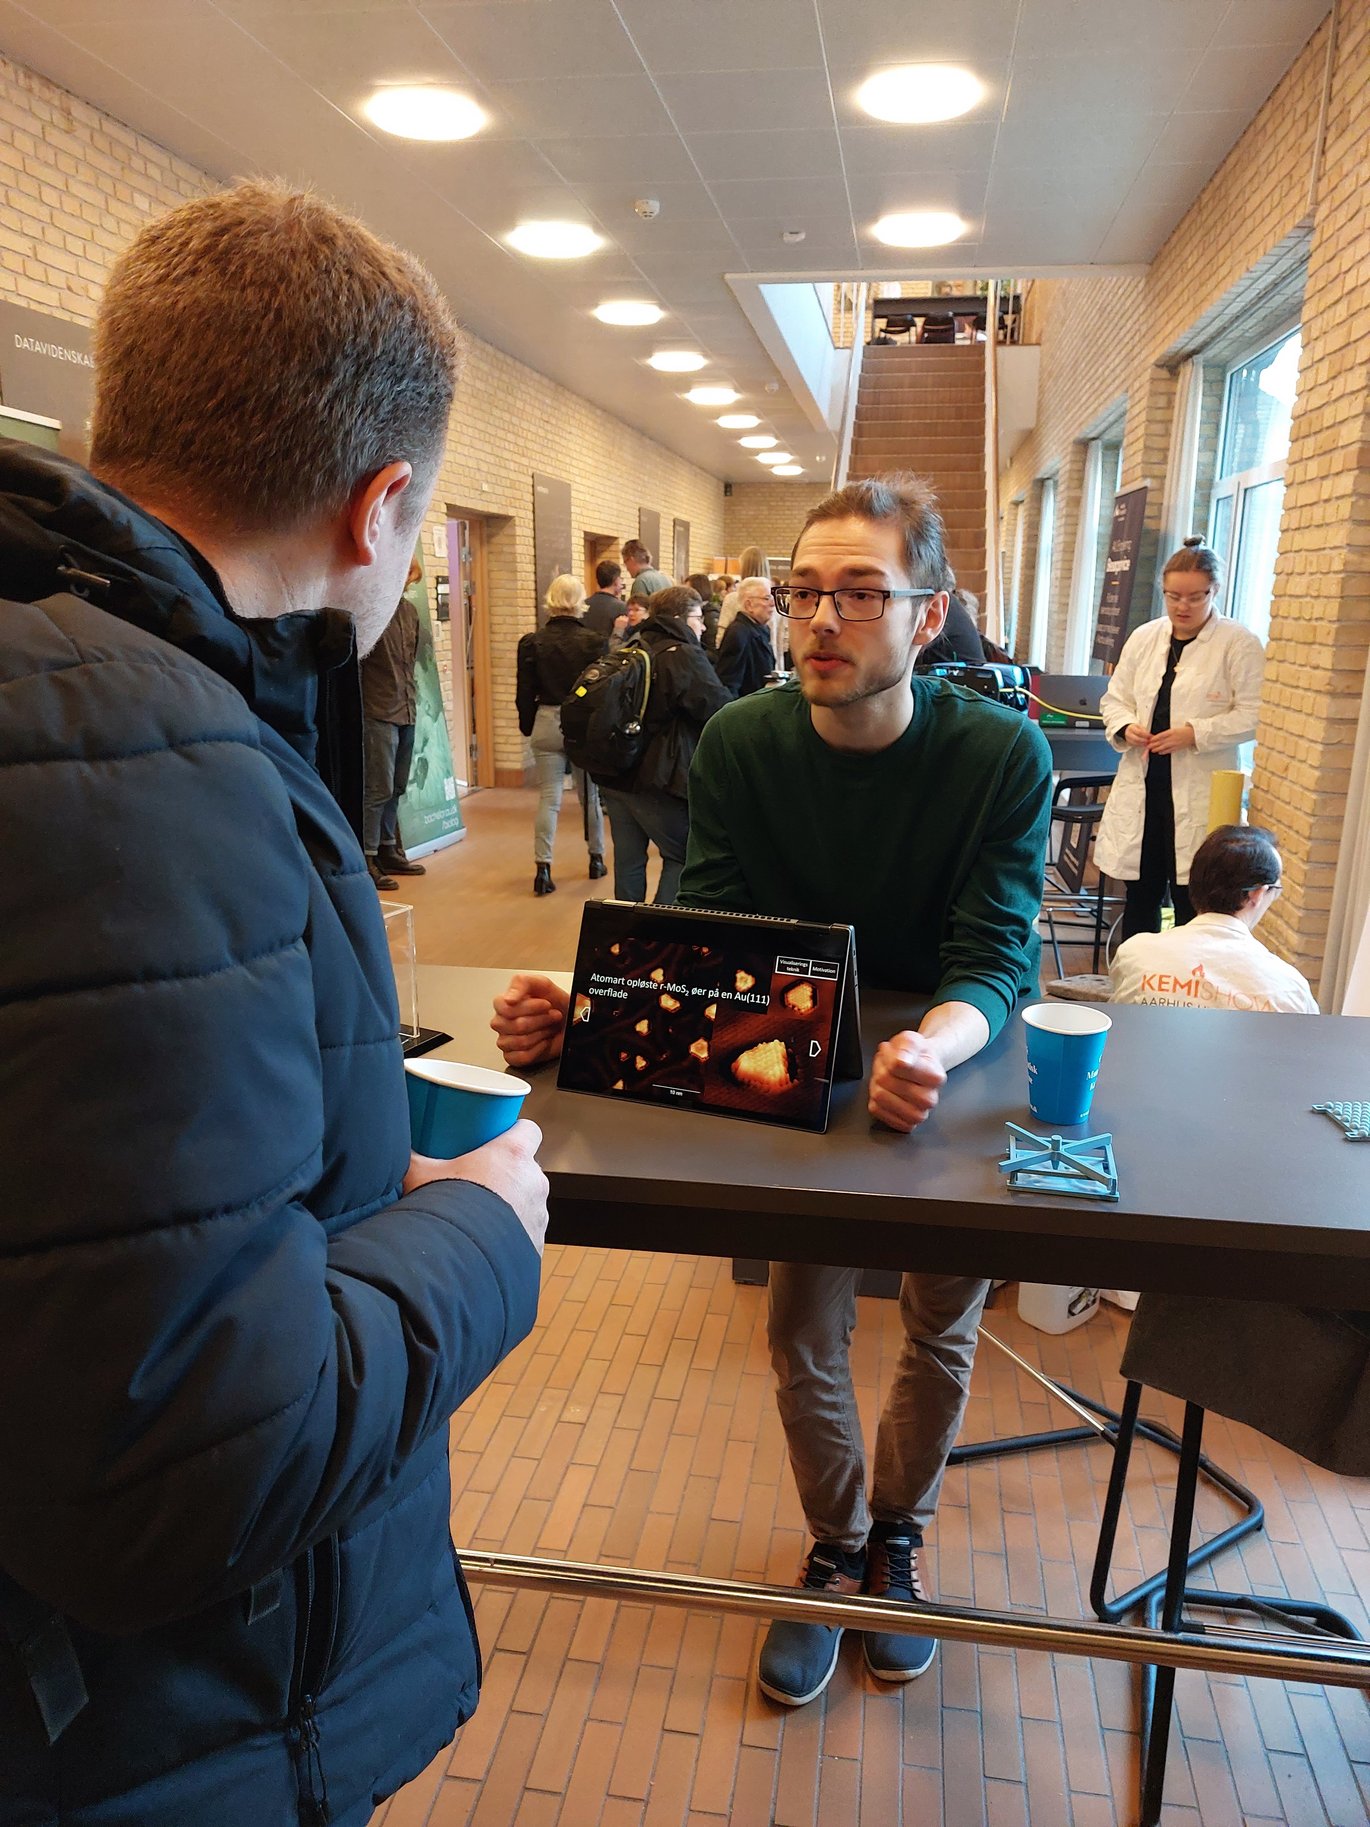 At the exhibition stands, the participants could be inspired for teaching with suggestions for professional class visits and teaching material. Photo: Julie Nørgaard Hostrup